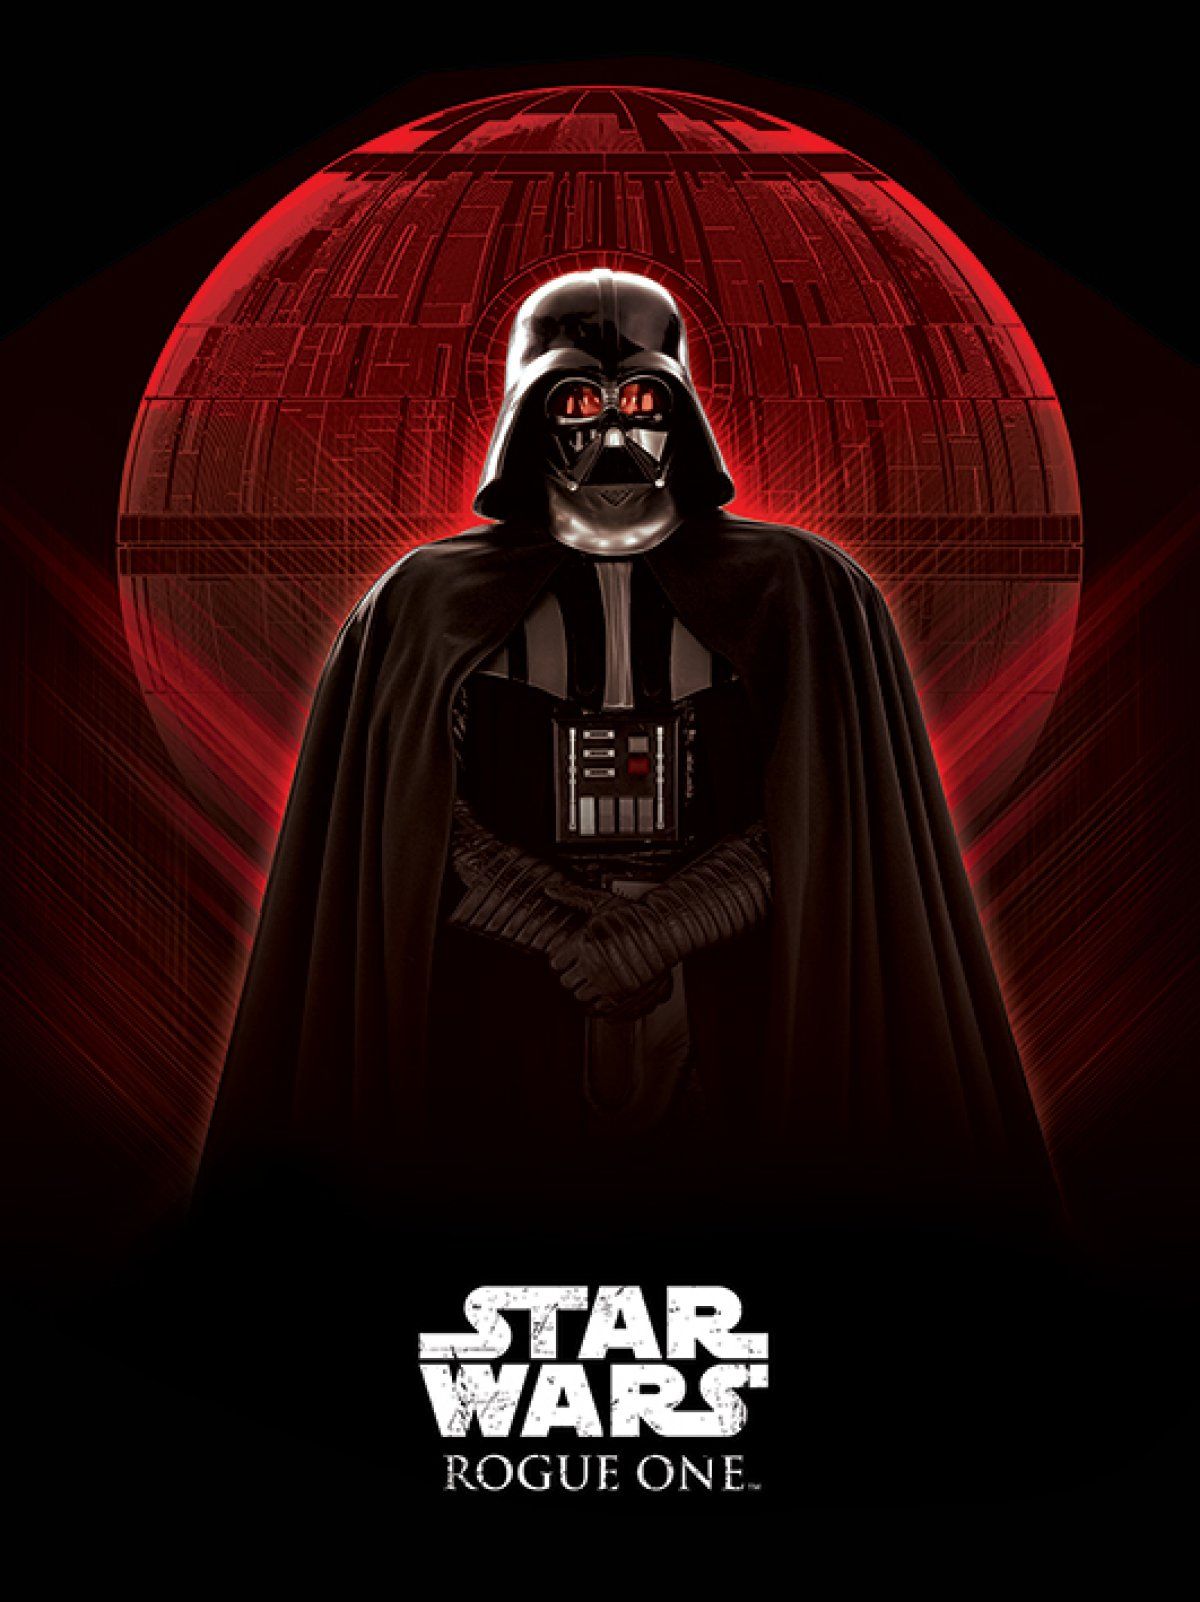 NEW Rogue One Official Posters HD Star Wars Story _ Darth Vader HD Hi Res. Rogue one star wars, Star wars, Poster de star wars